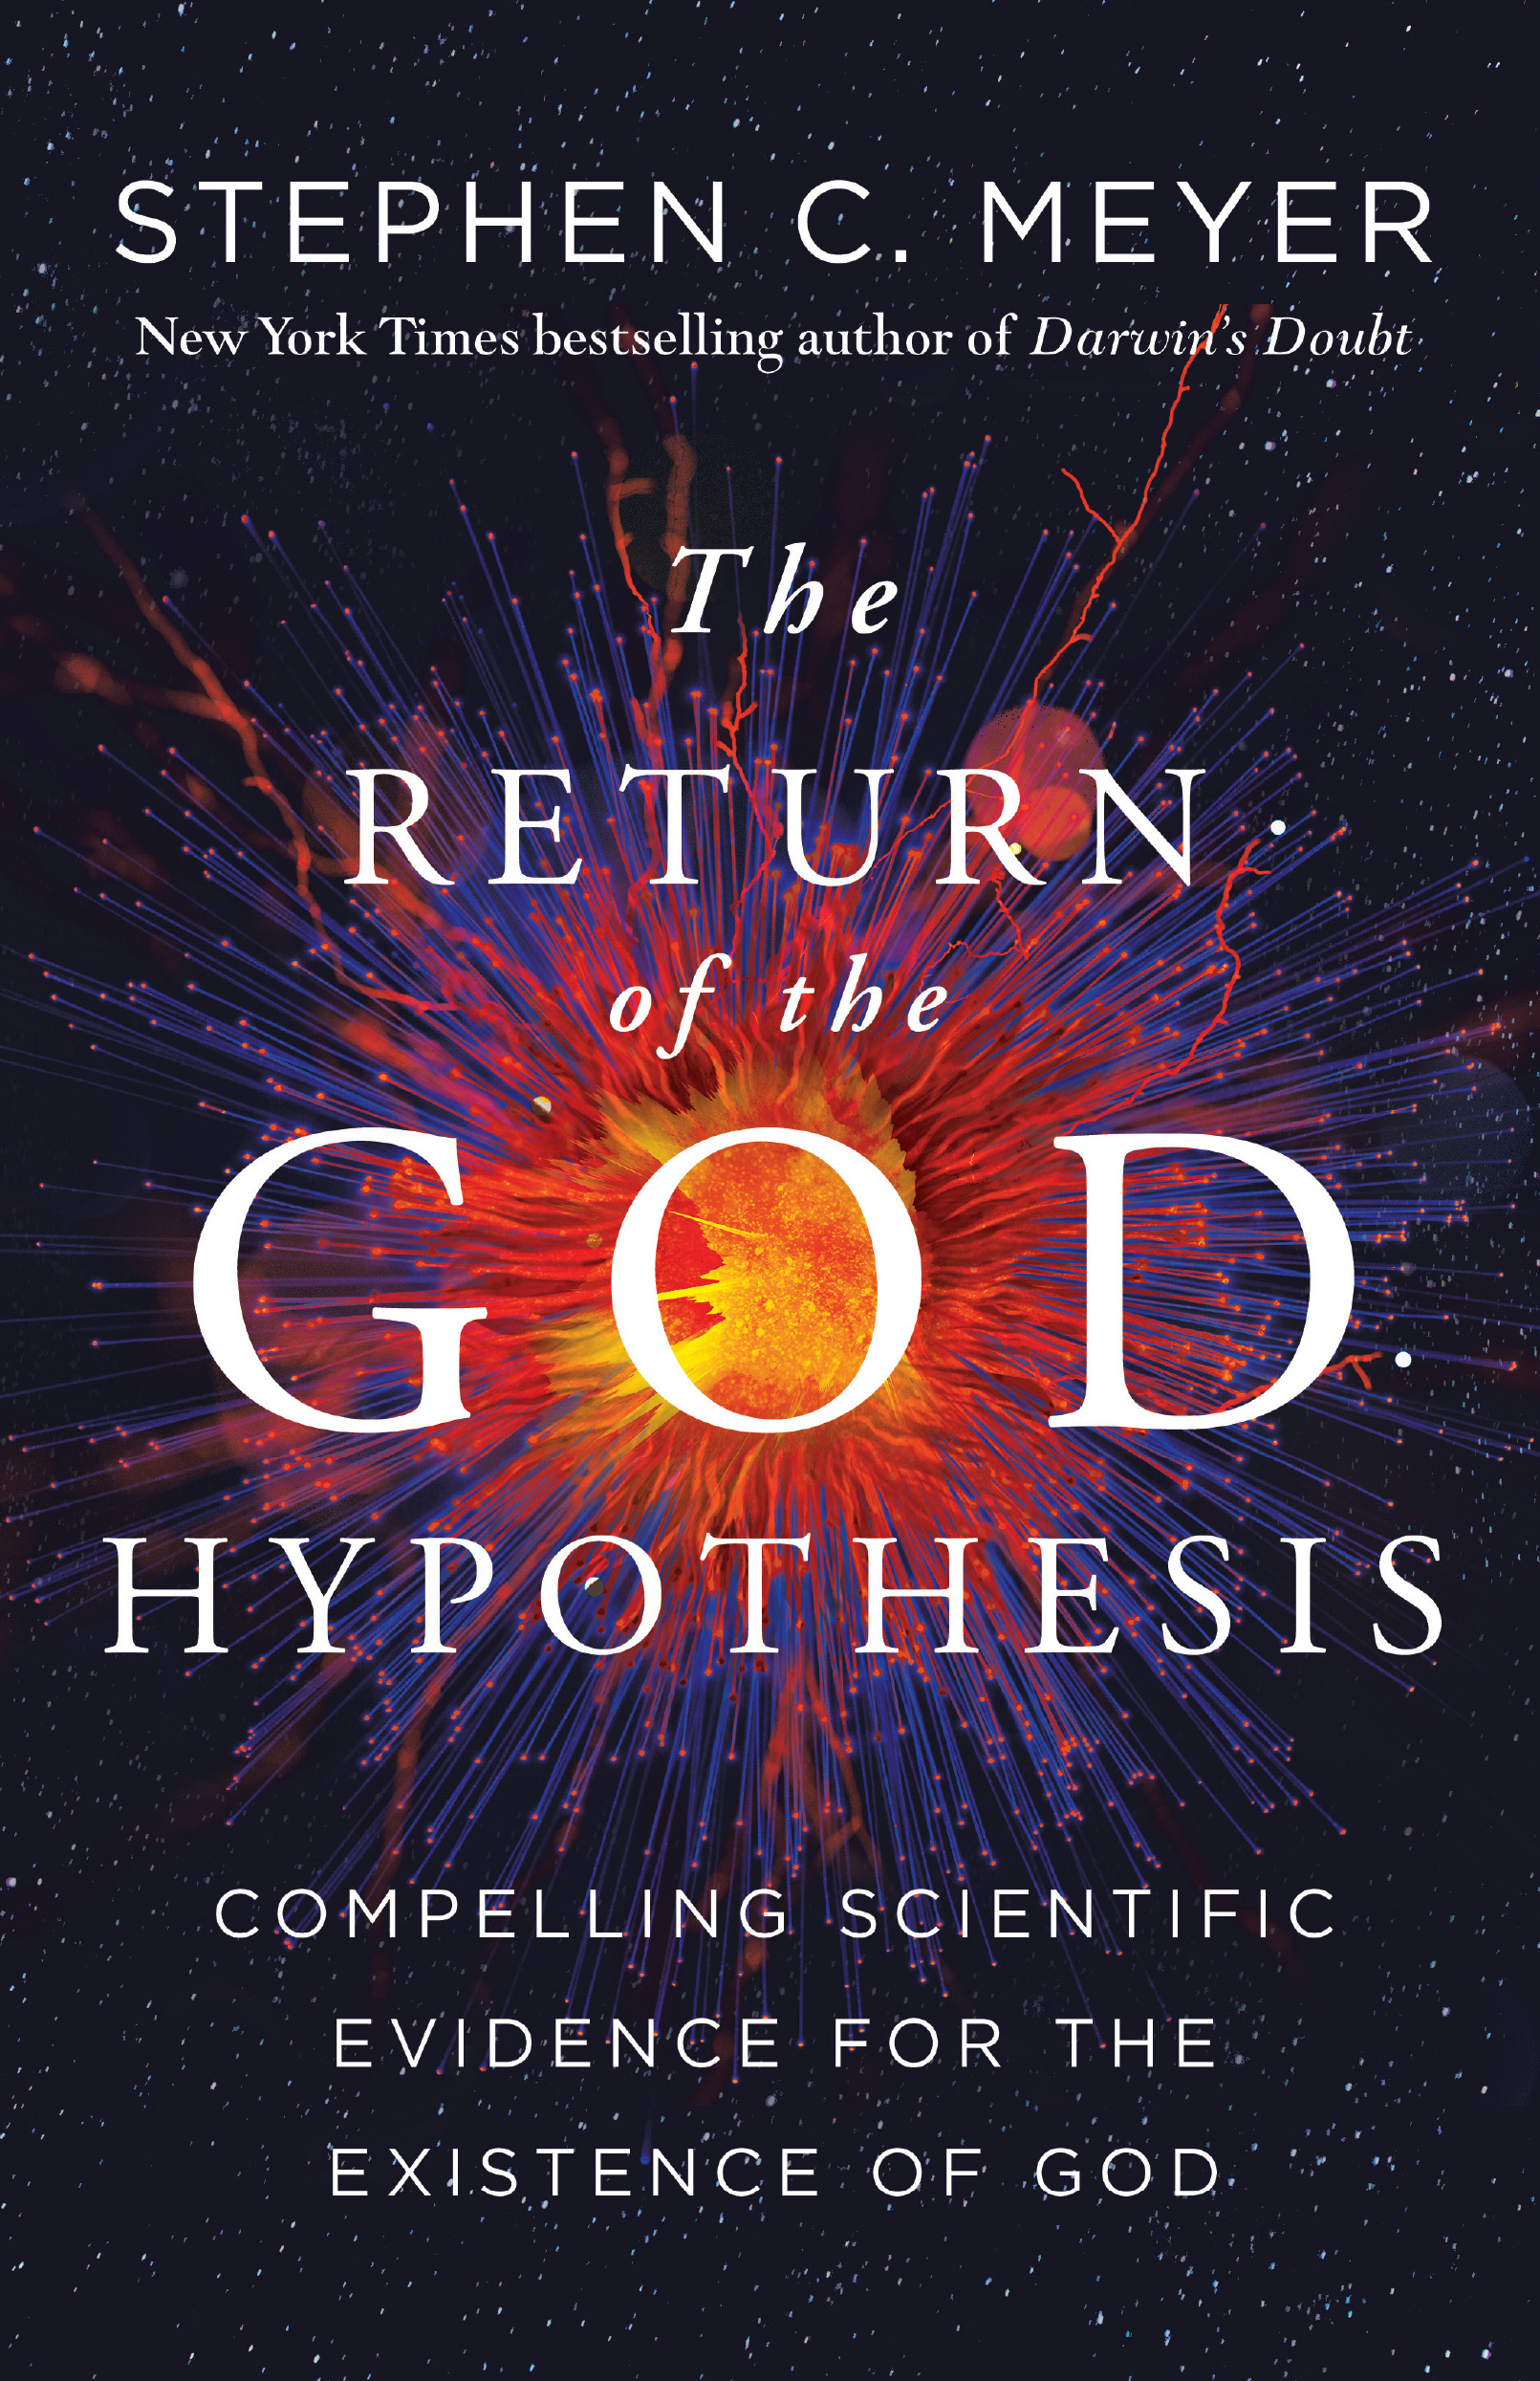 the hypothesis book